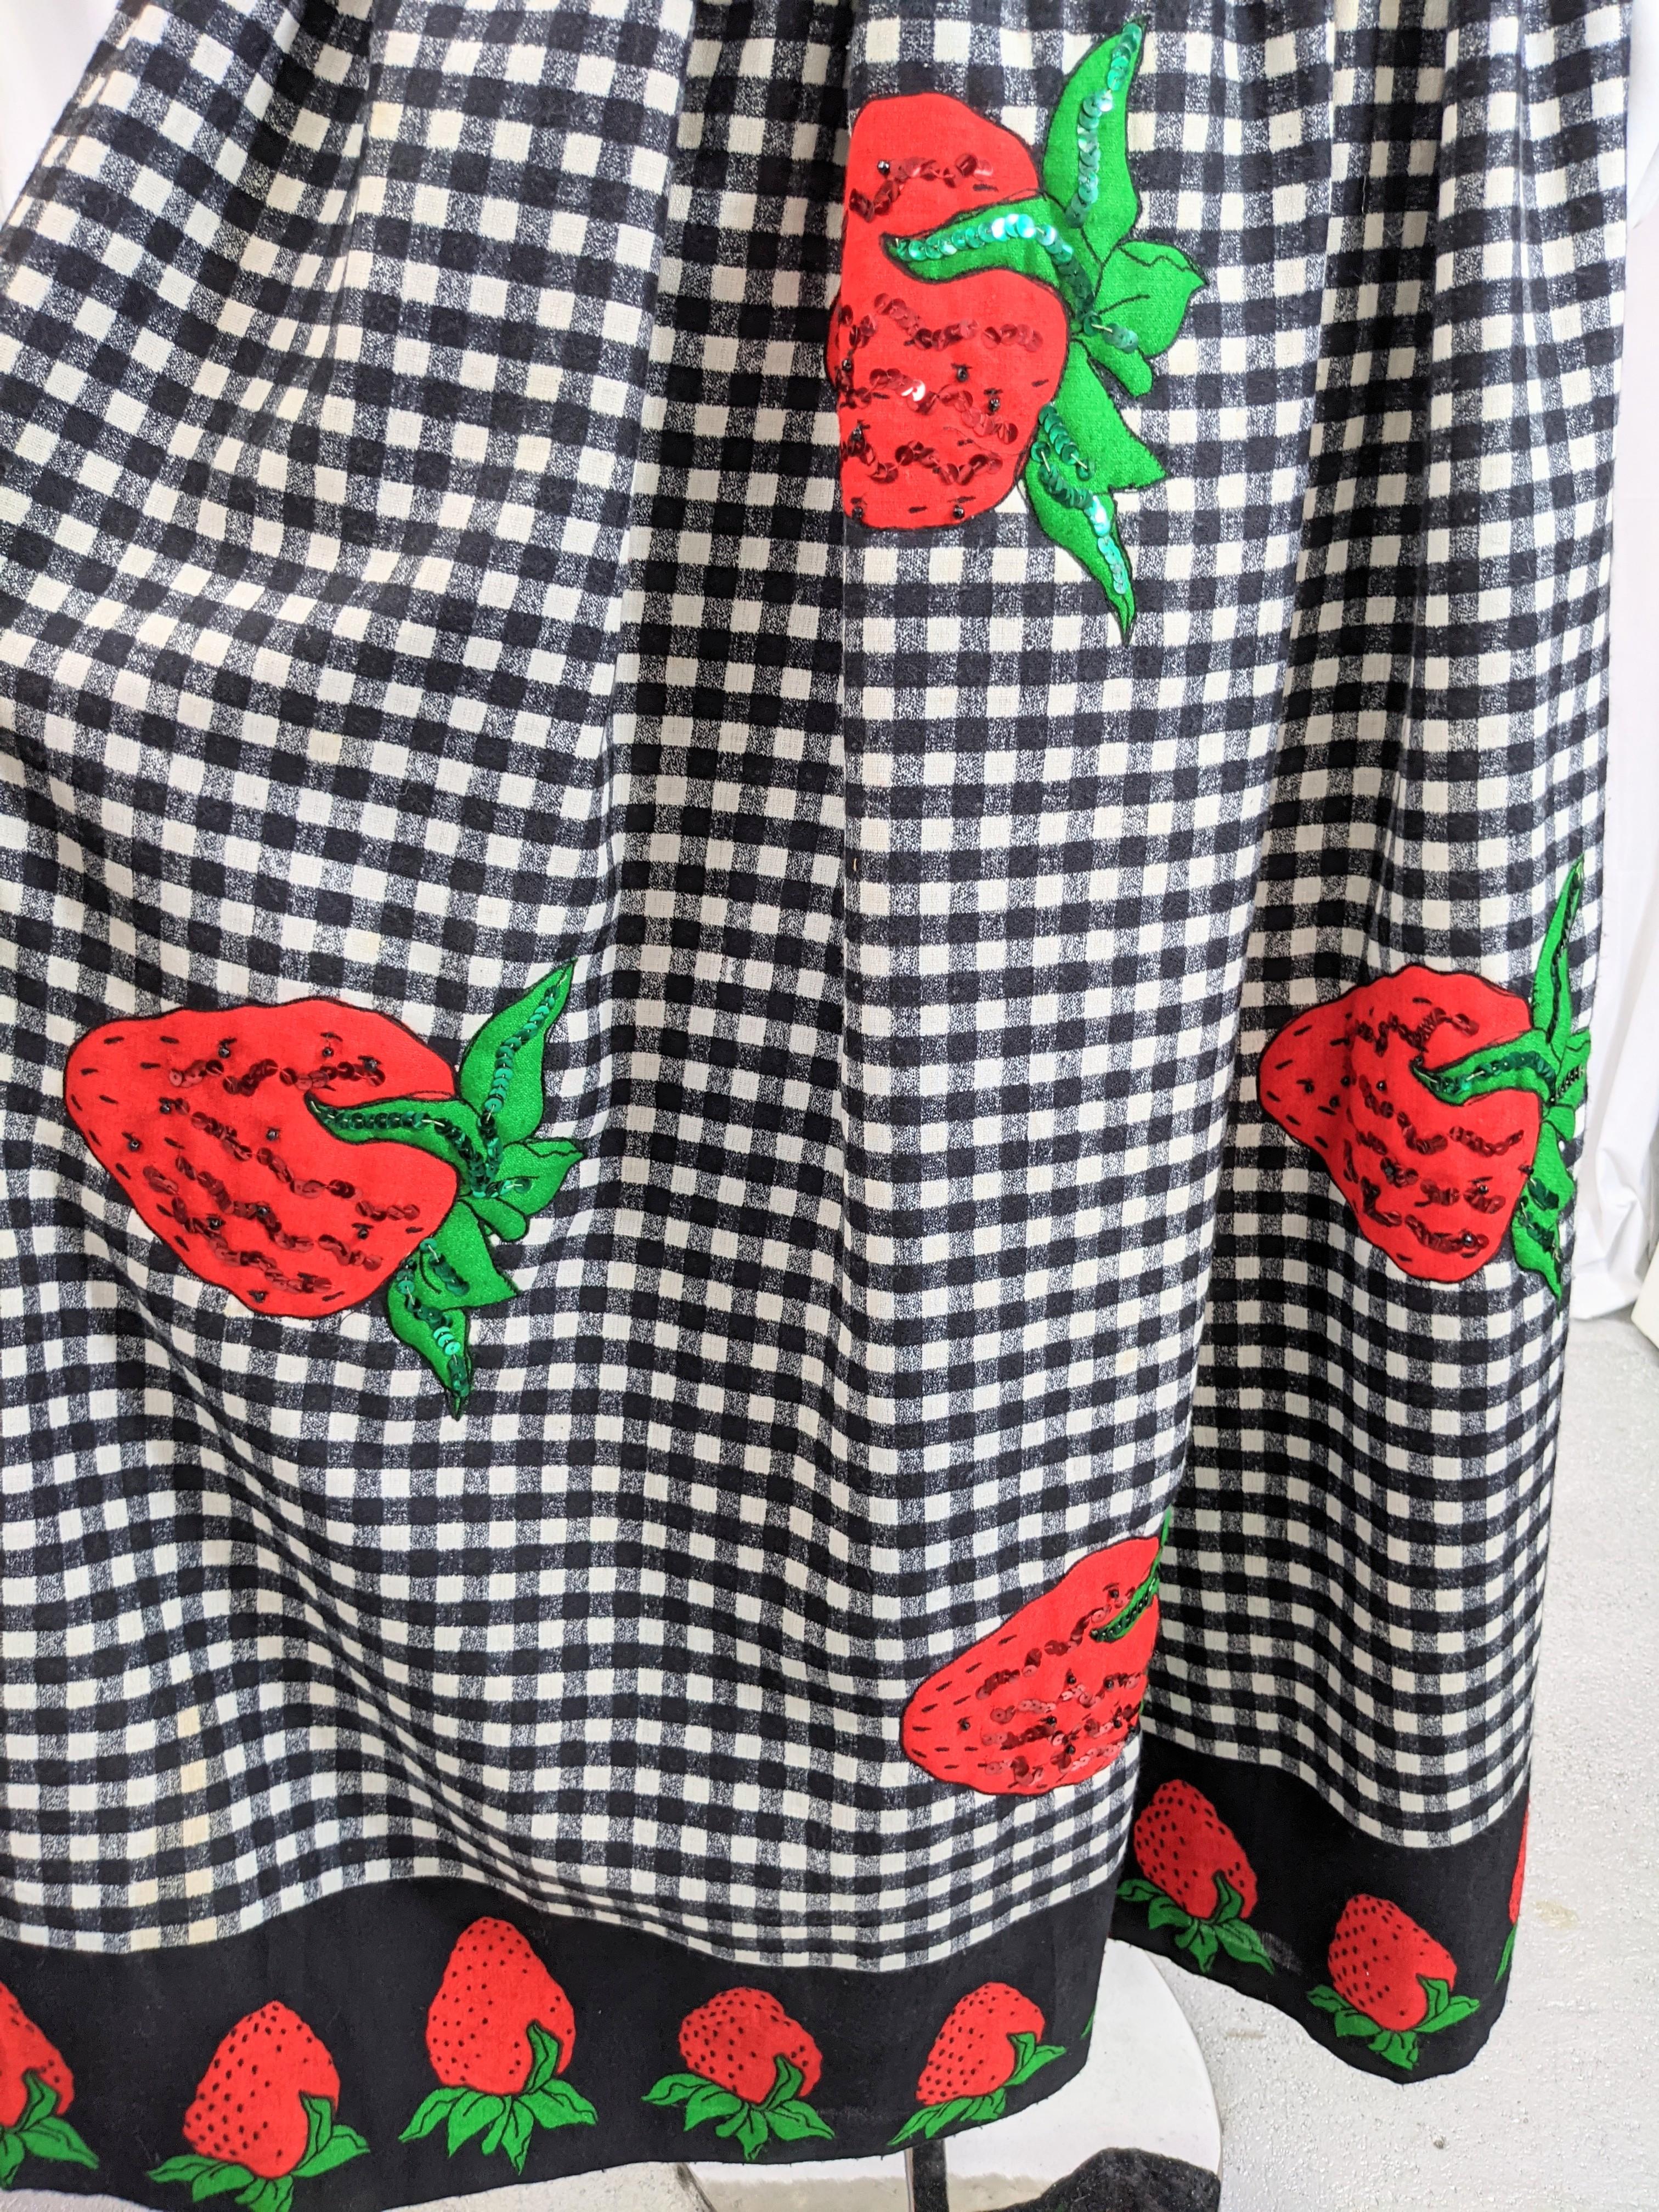 Sequin Accented Strawberry Hostess Skirt In Good Condition For Sale In New York, NY